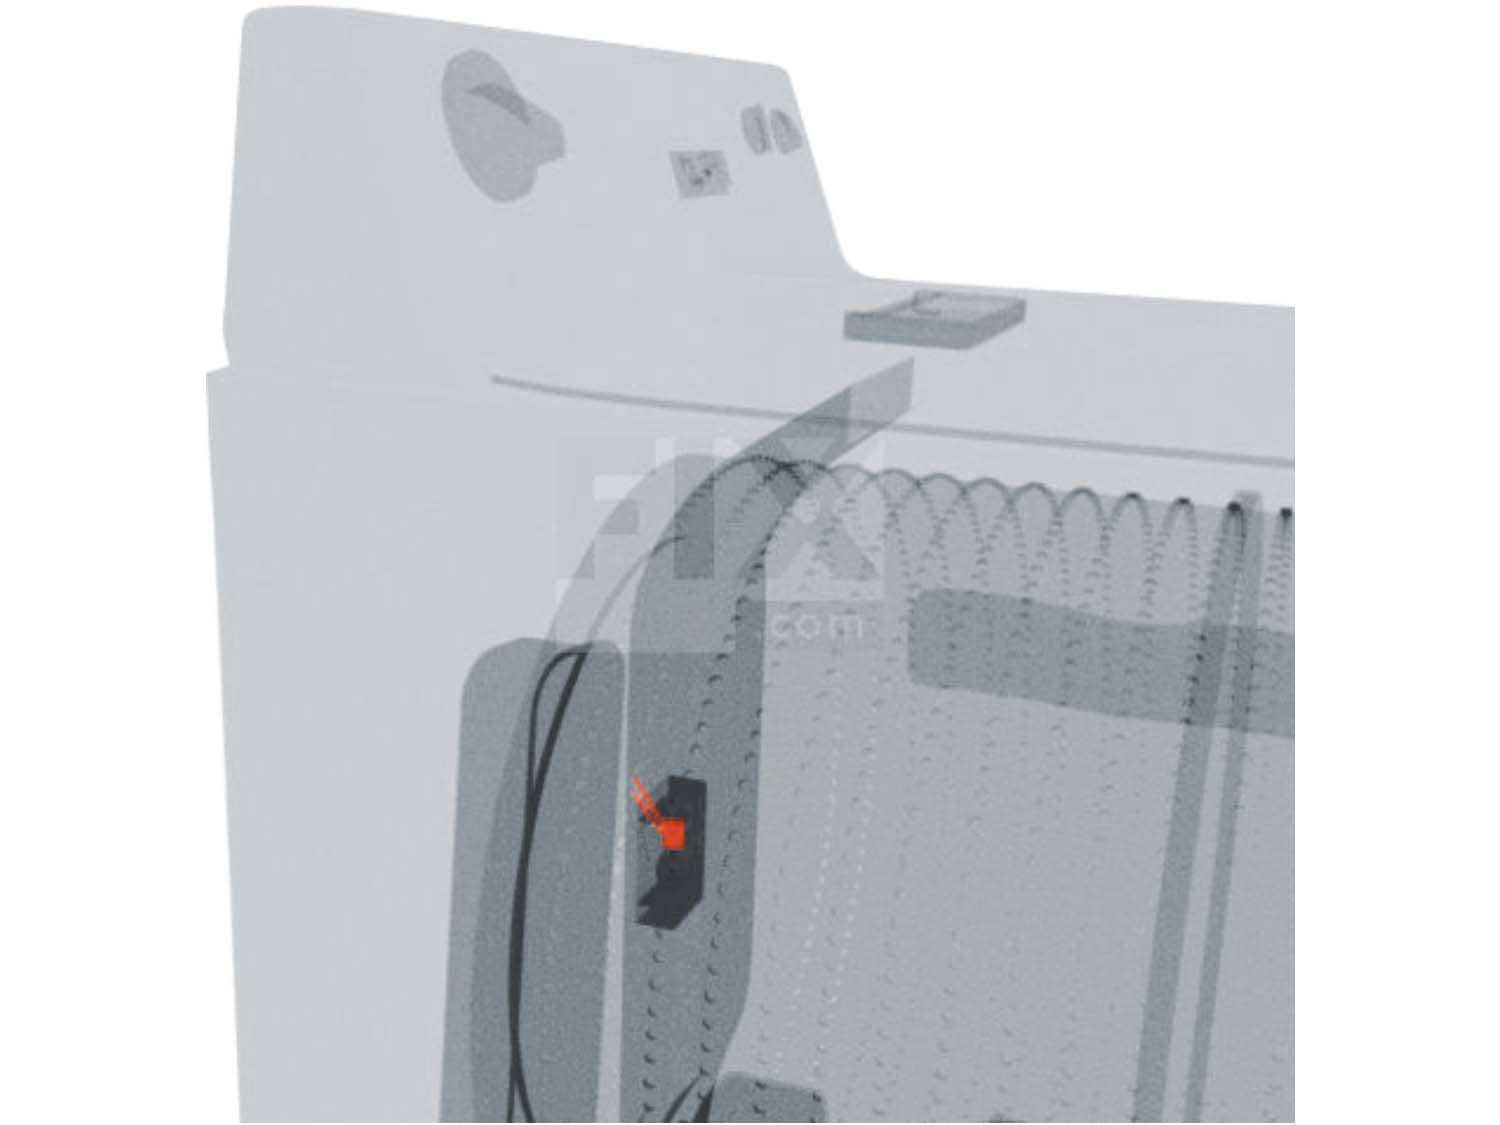 A 3D diagram showing the components of a dryer and specifying the location of the bulb socket